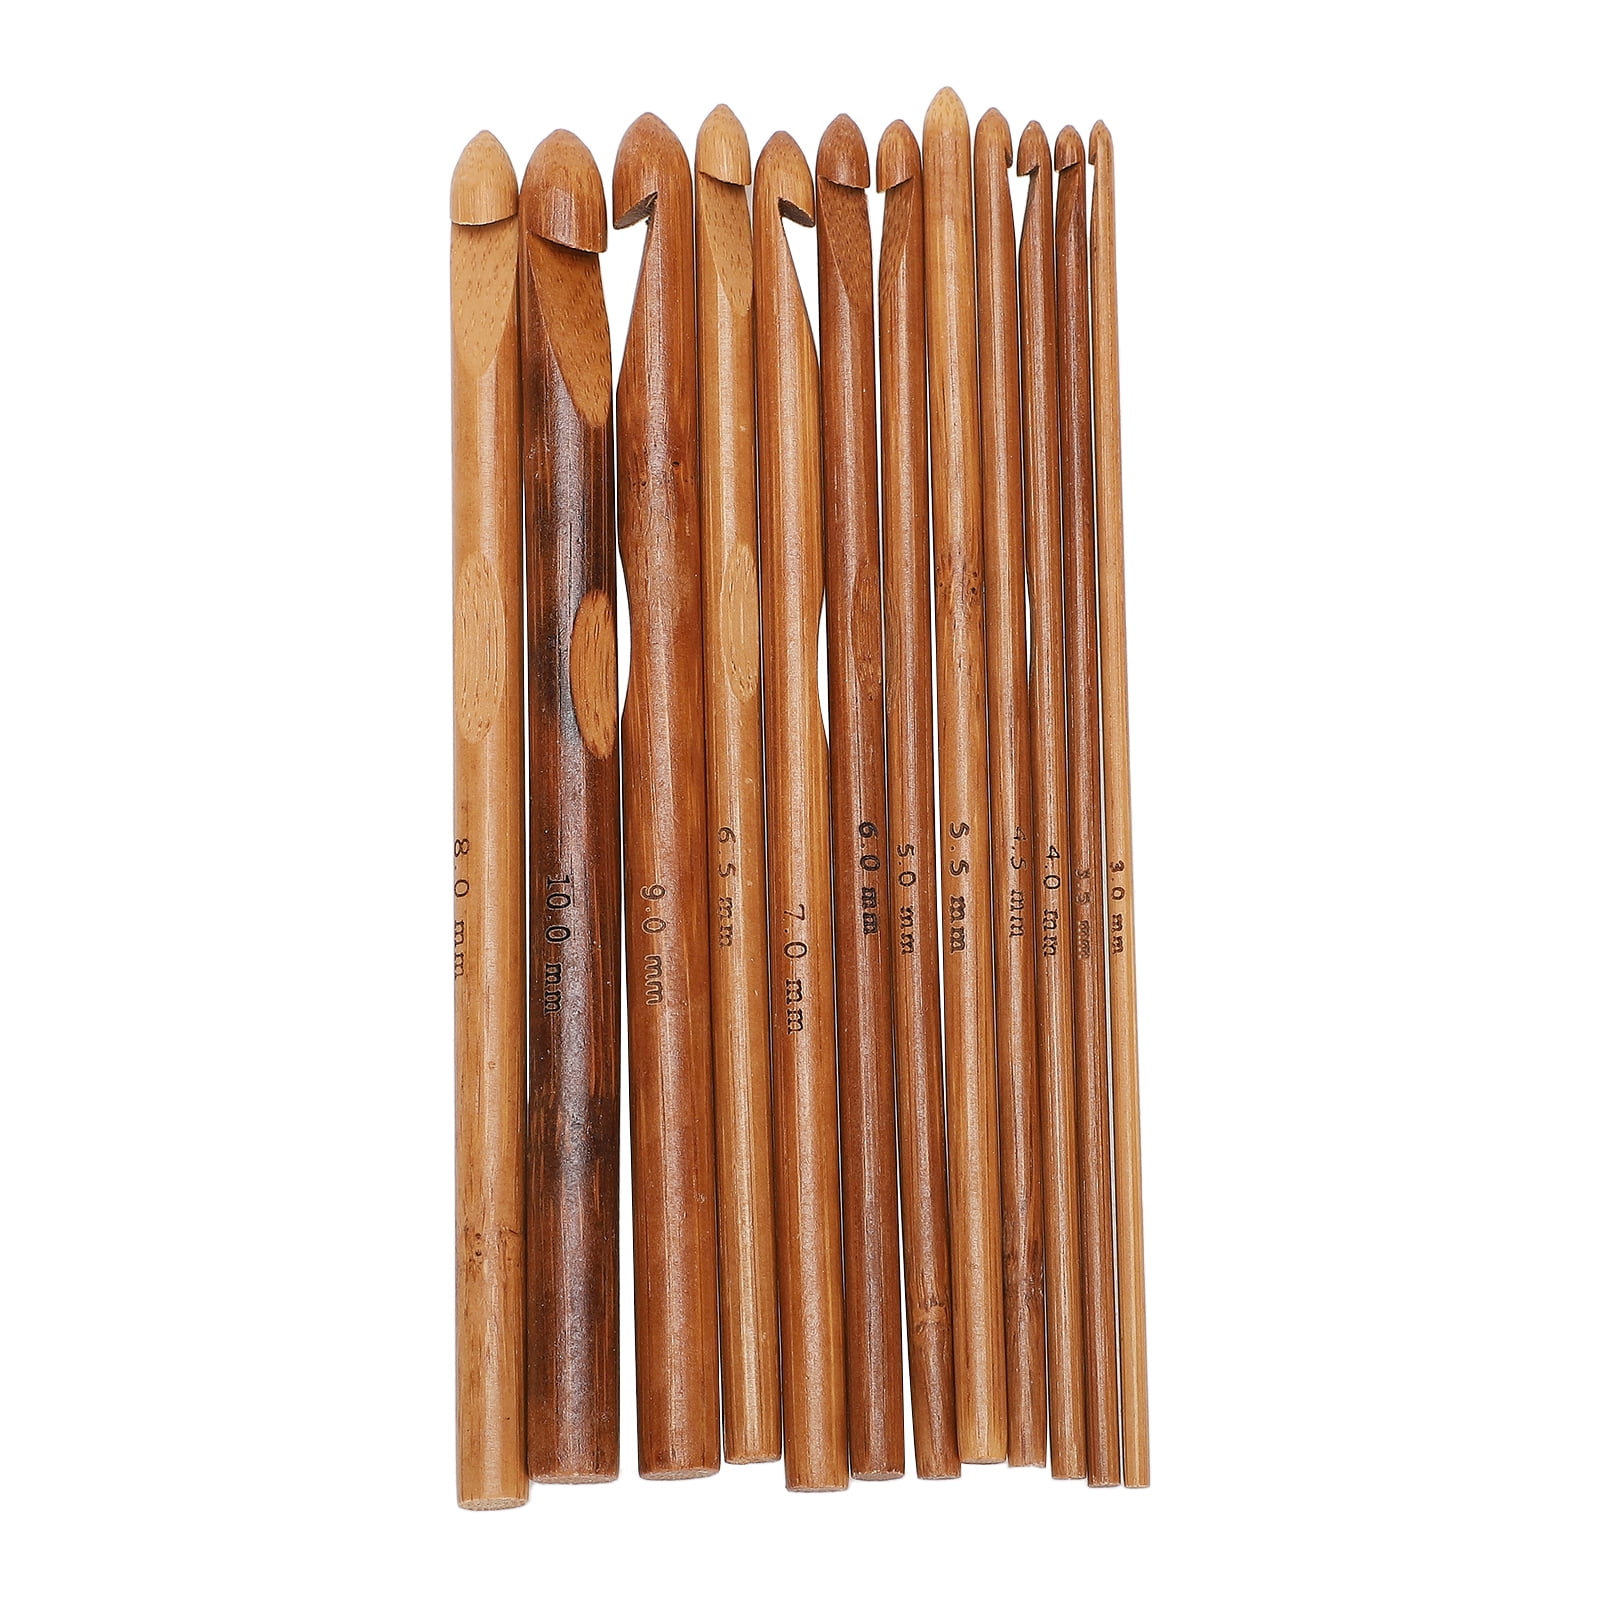 Hestya 15 Pieces Wooden Bamboo Crochet Hooks Set Handcrafted Knitting Needles Weave Yarn Craft 3 to 25 mm in Diameters